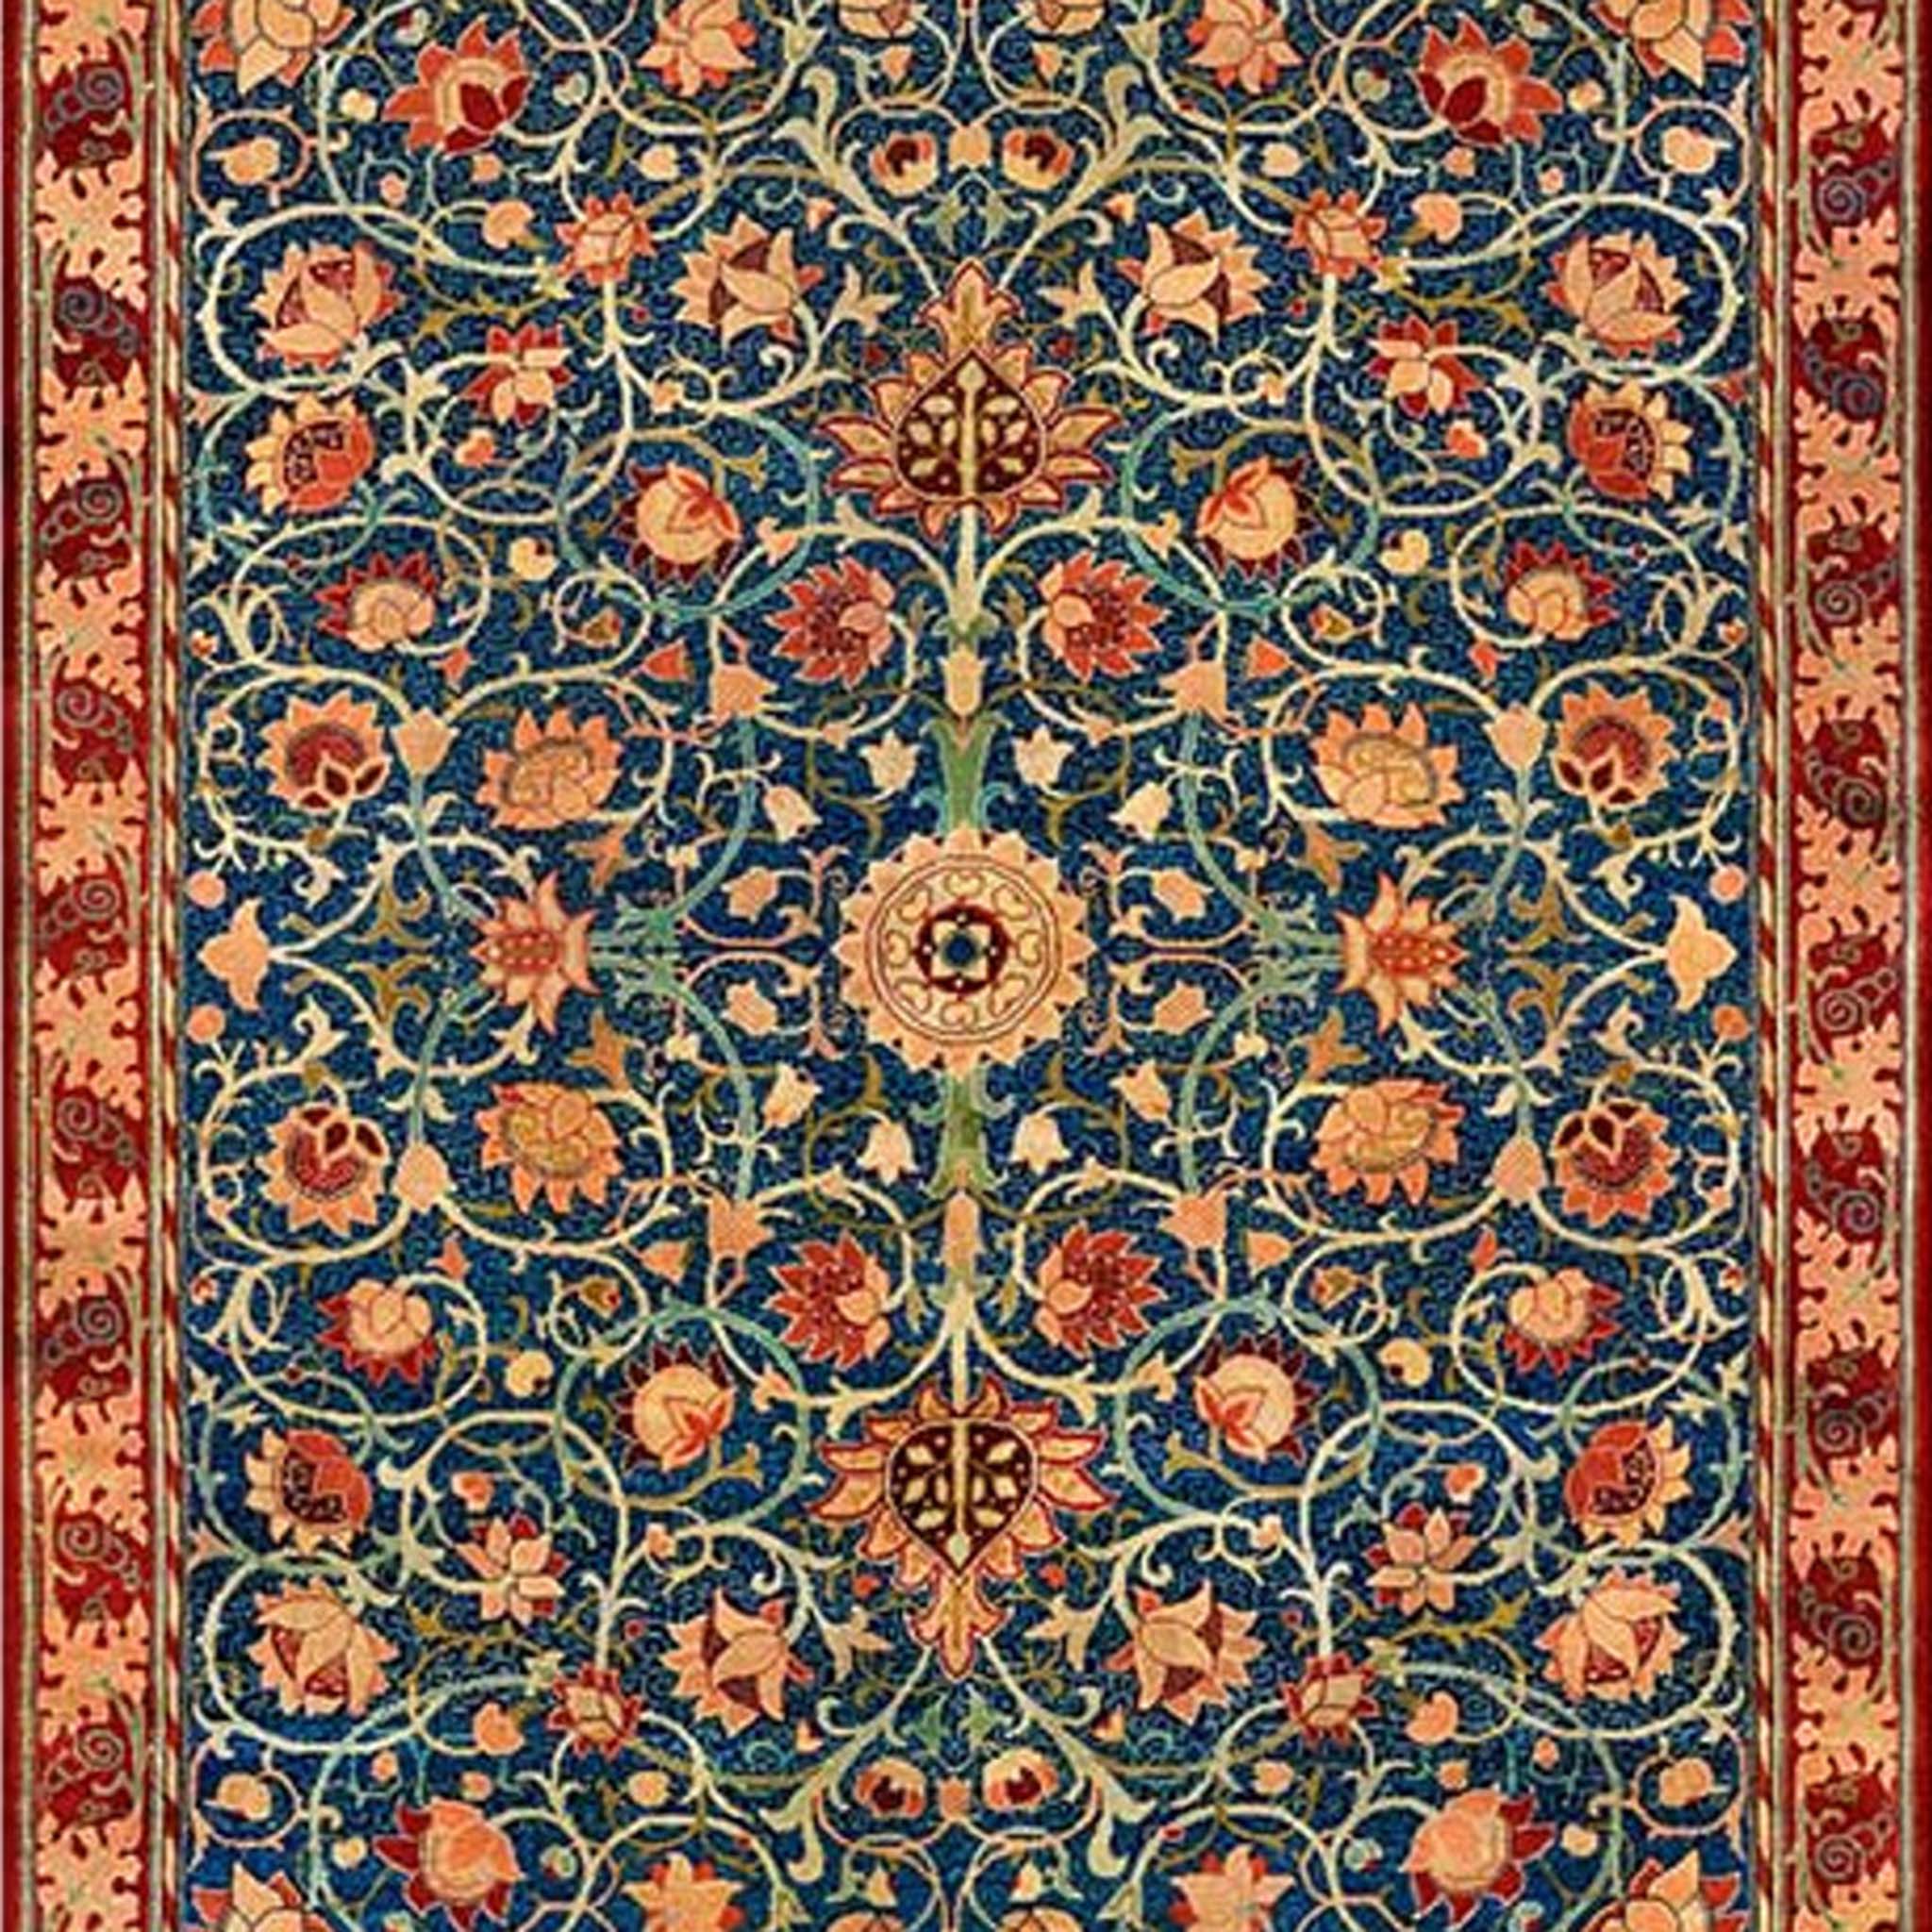 Close-up of an A1 rice paper design of a vintage carpet of reds and blues and features a repeating floral pattern.